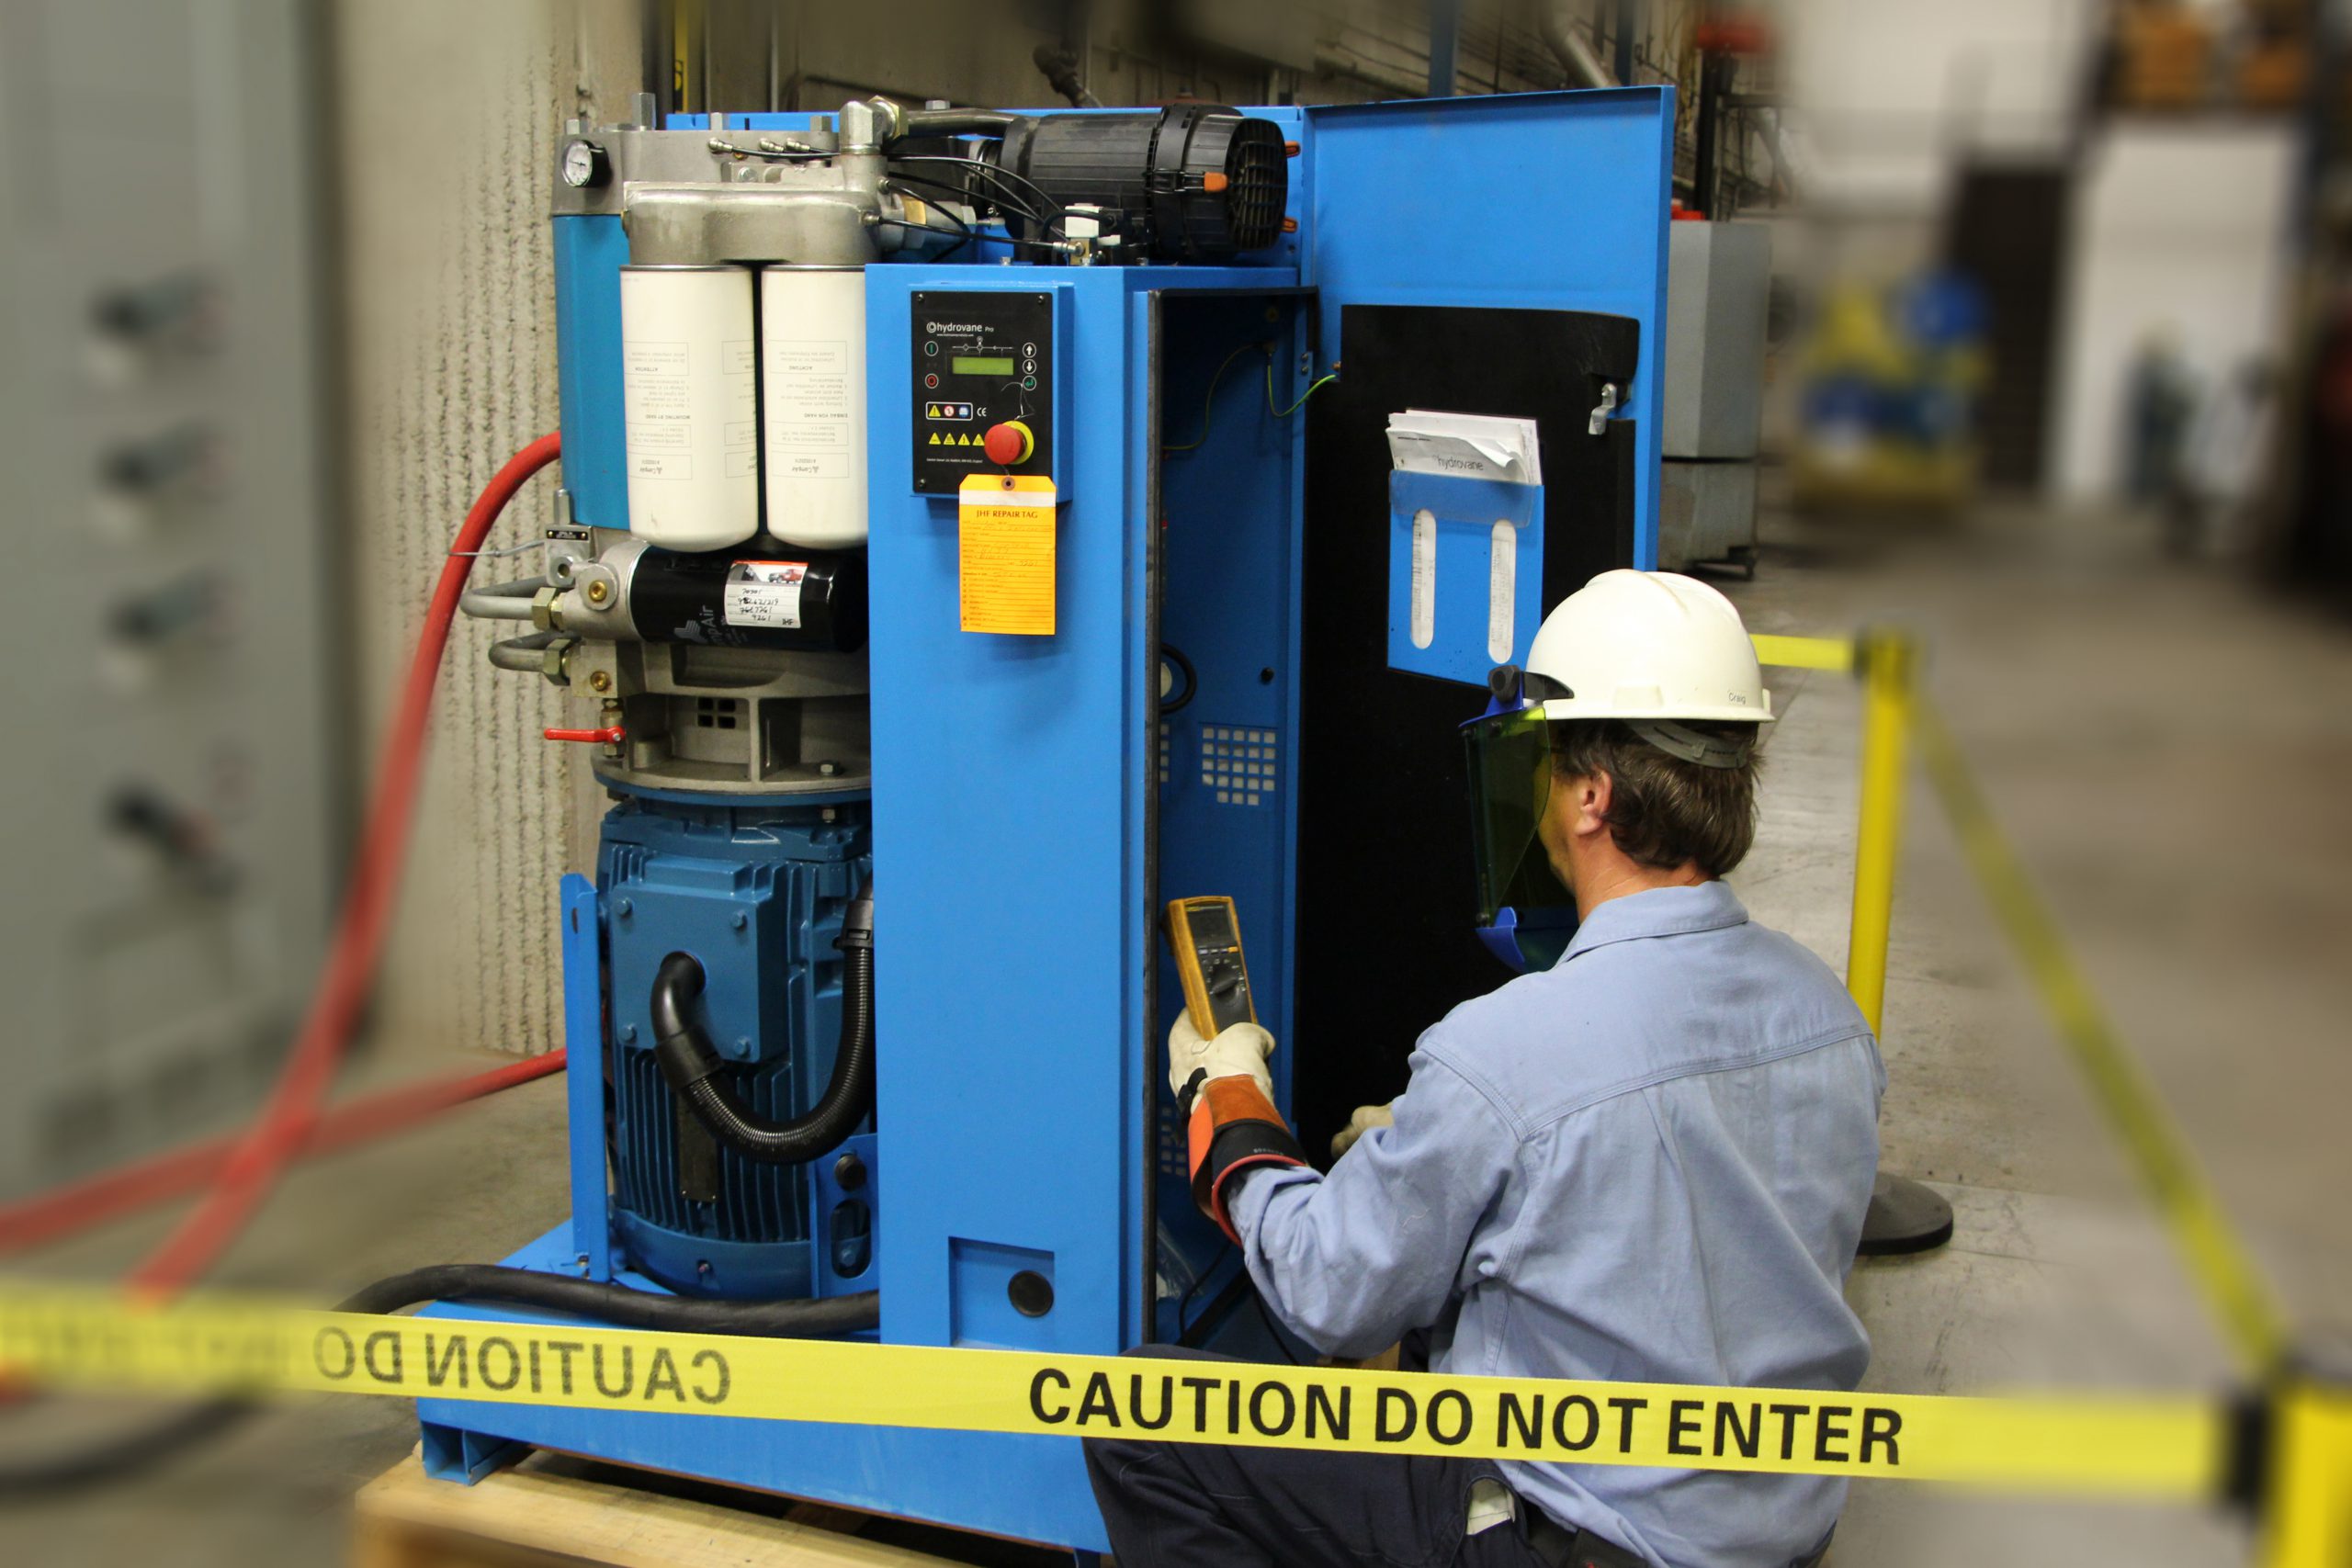 A technician analyzes the parts within an air compressor.